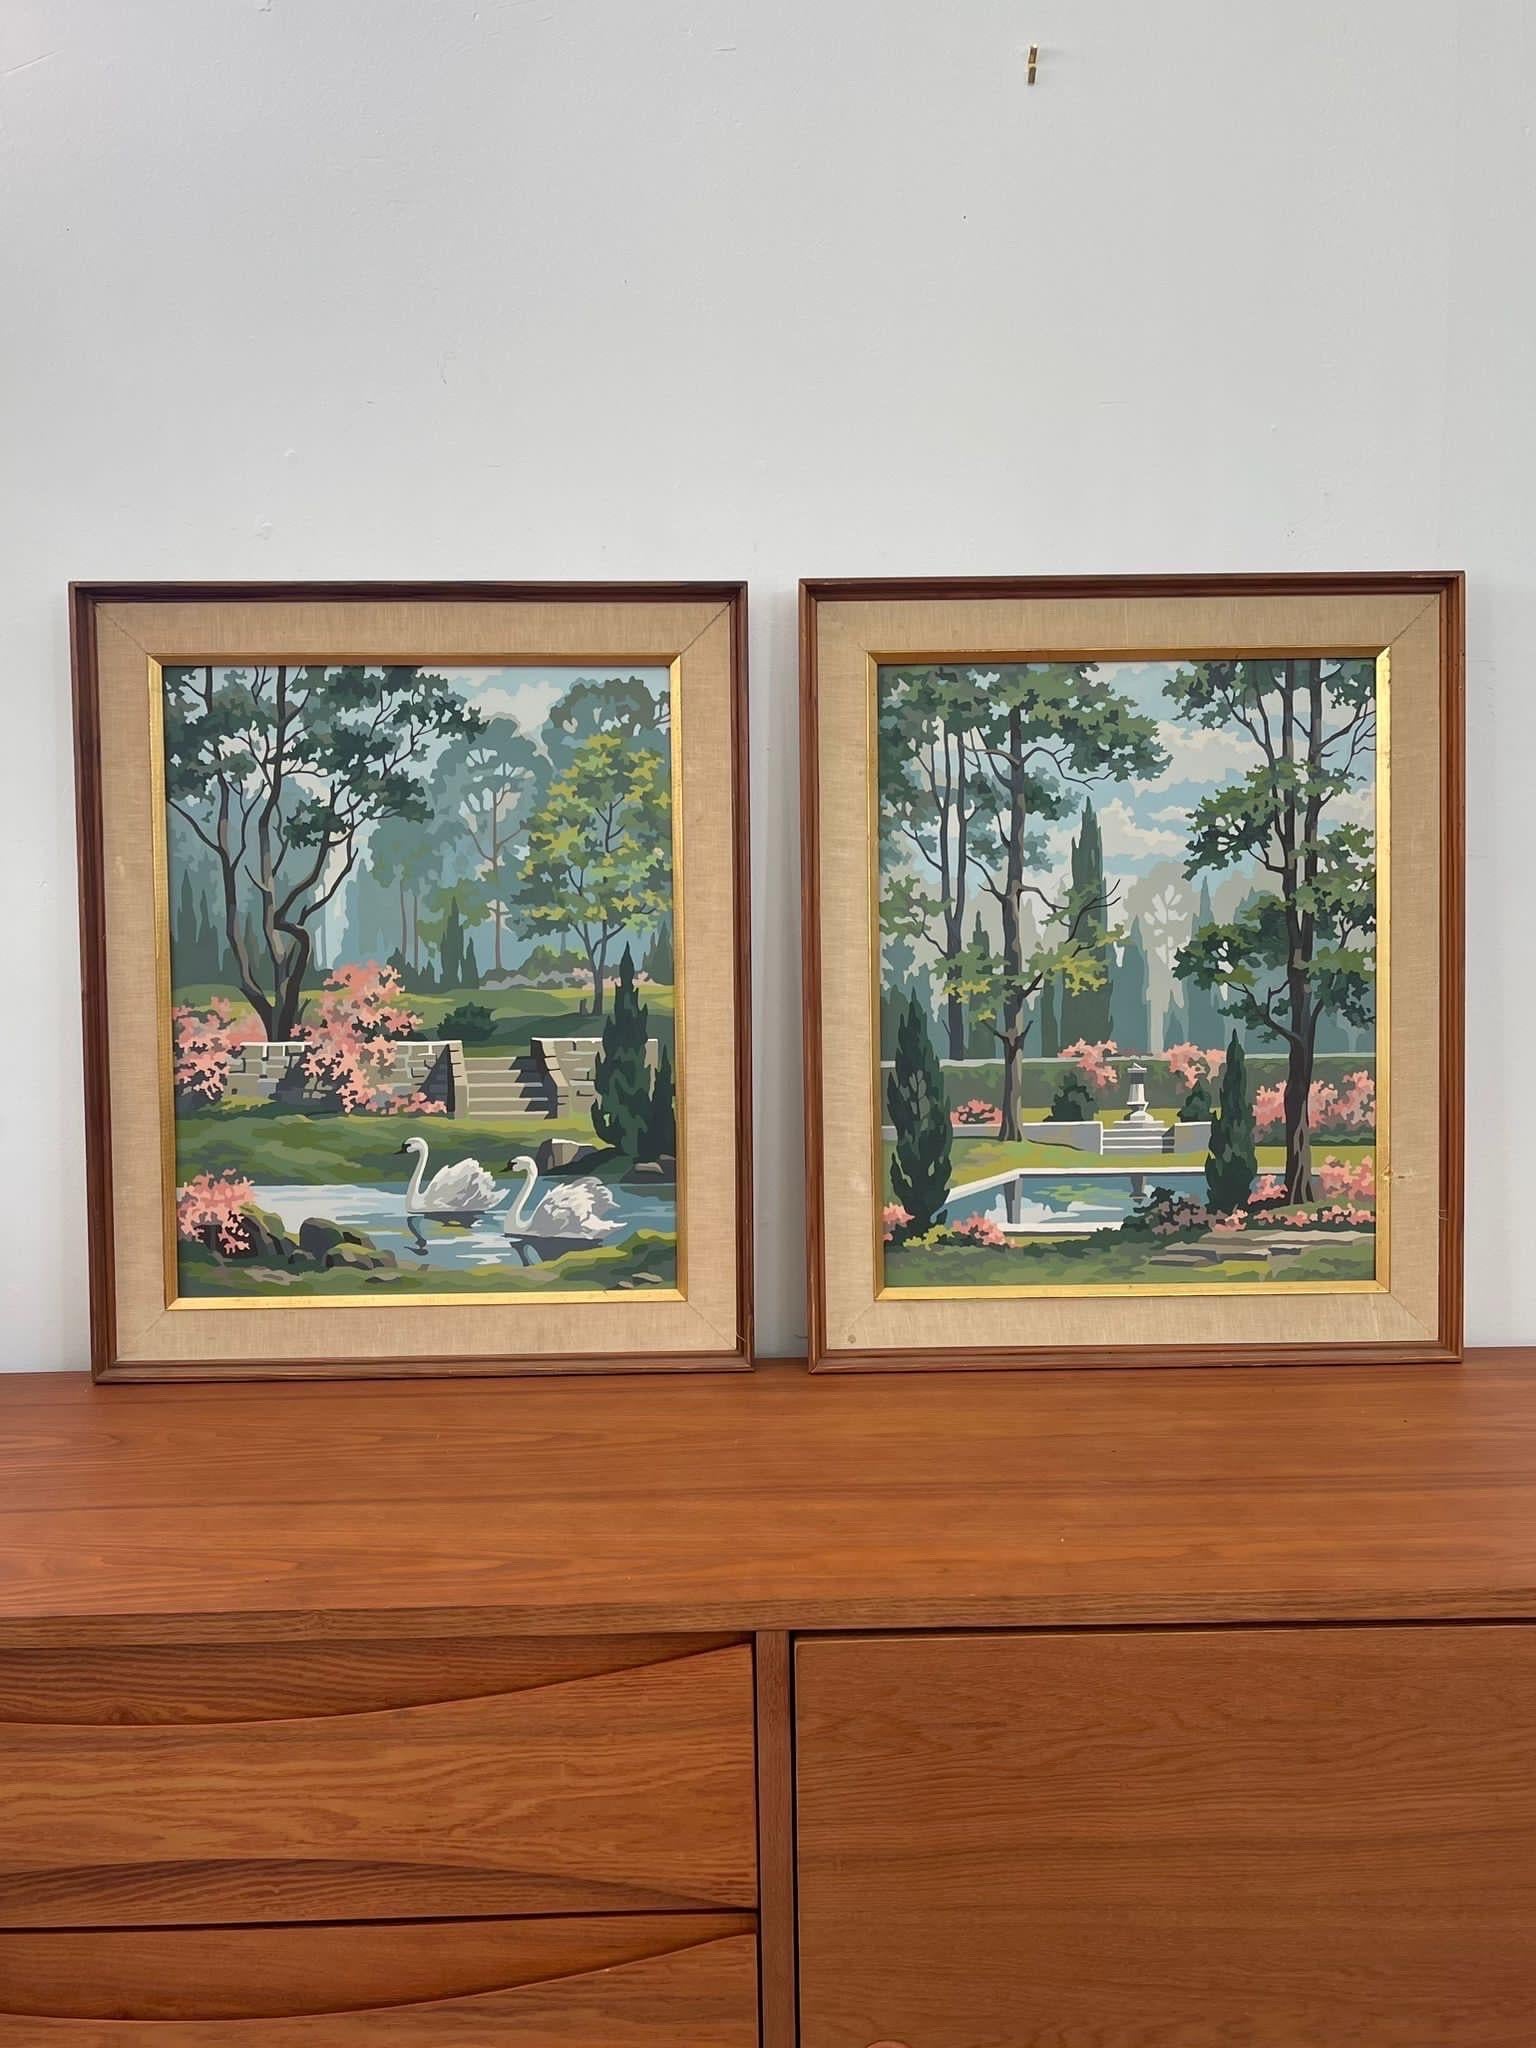 Pair of Vintage Paintings of Garden Scenes . One Painting Features Swan and other Shows a Court Yard.They are Complimentary due to the Pink Floral Accents and the Similar ponds . Wooden Frame with Gold Accents. Vintage Condition Consistent with Age